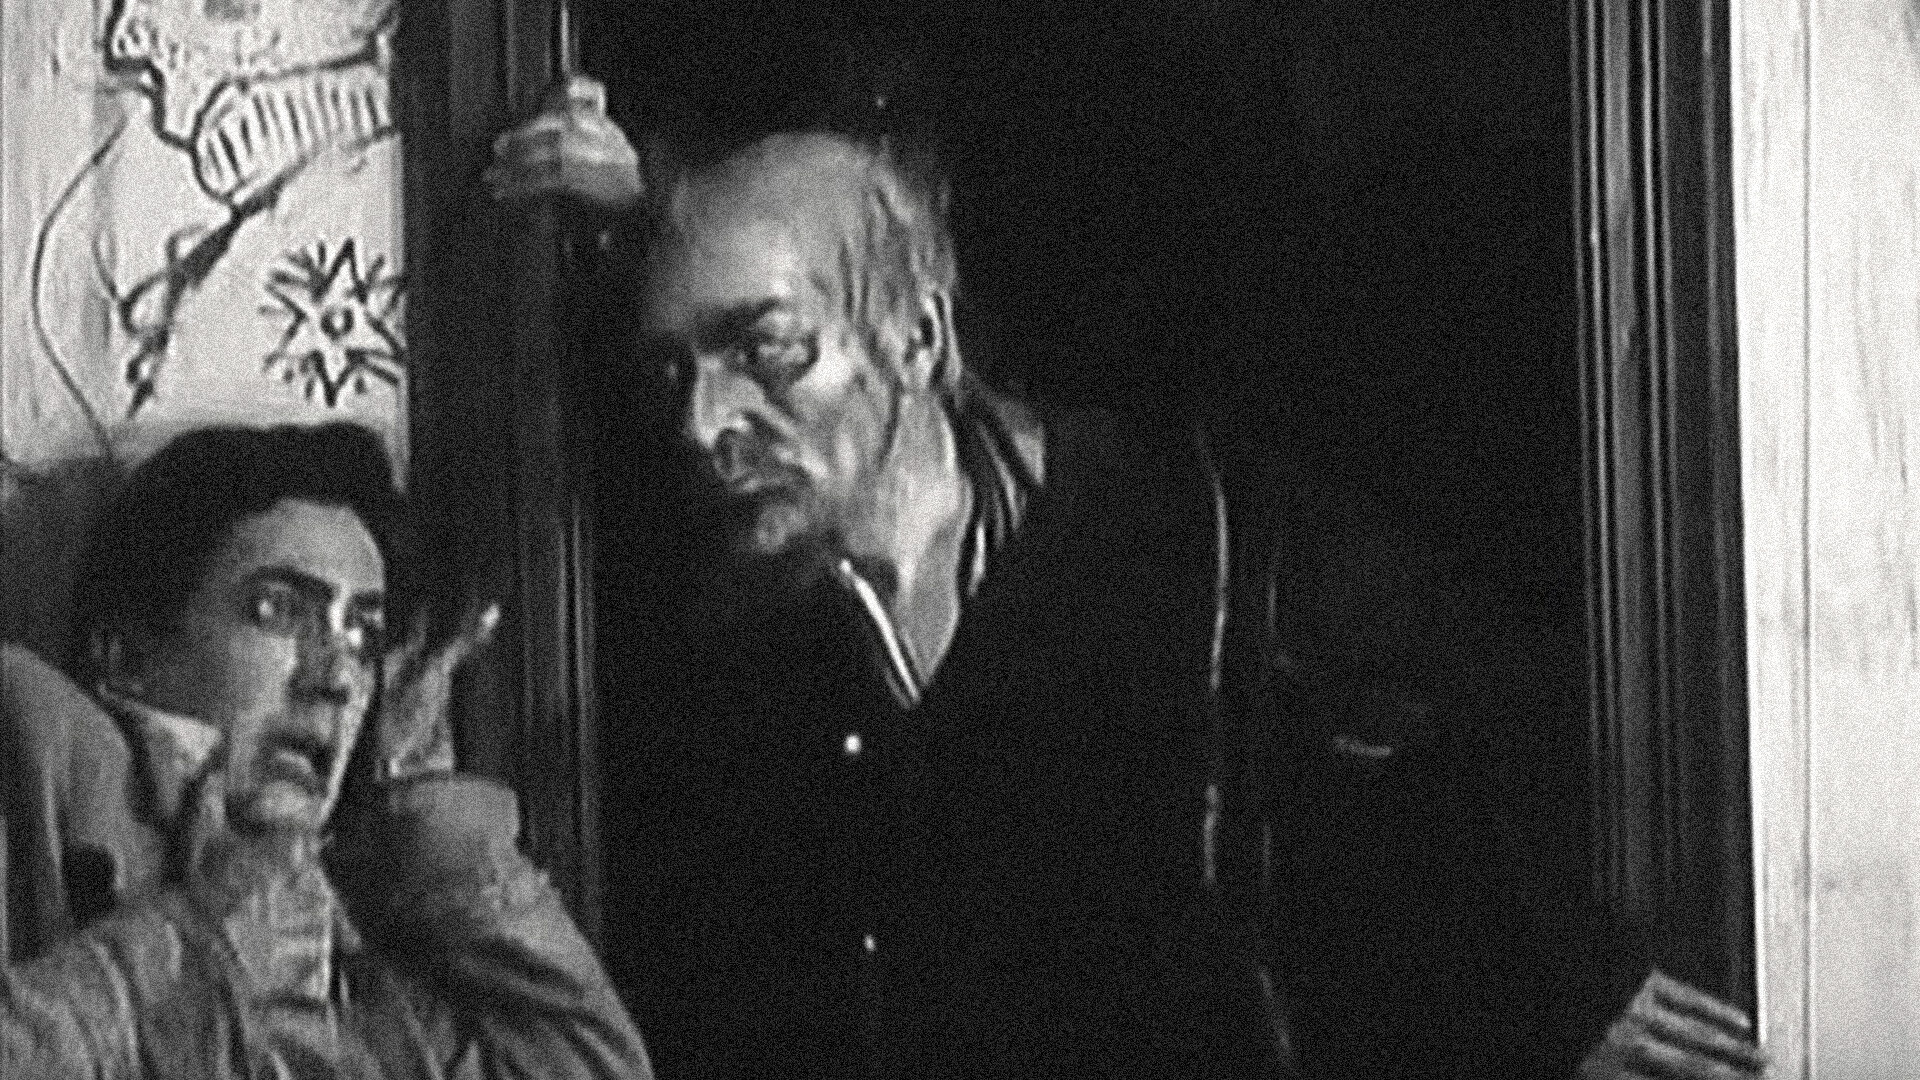 A still from 'The Portrait' silent film